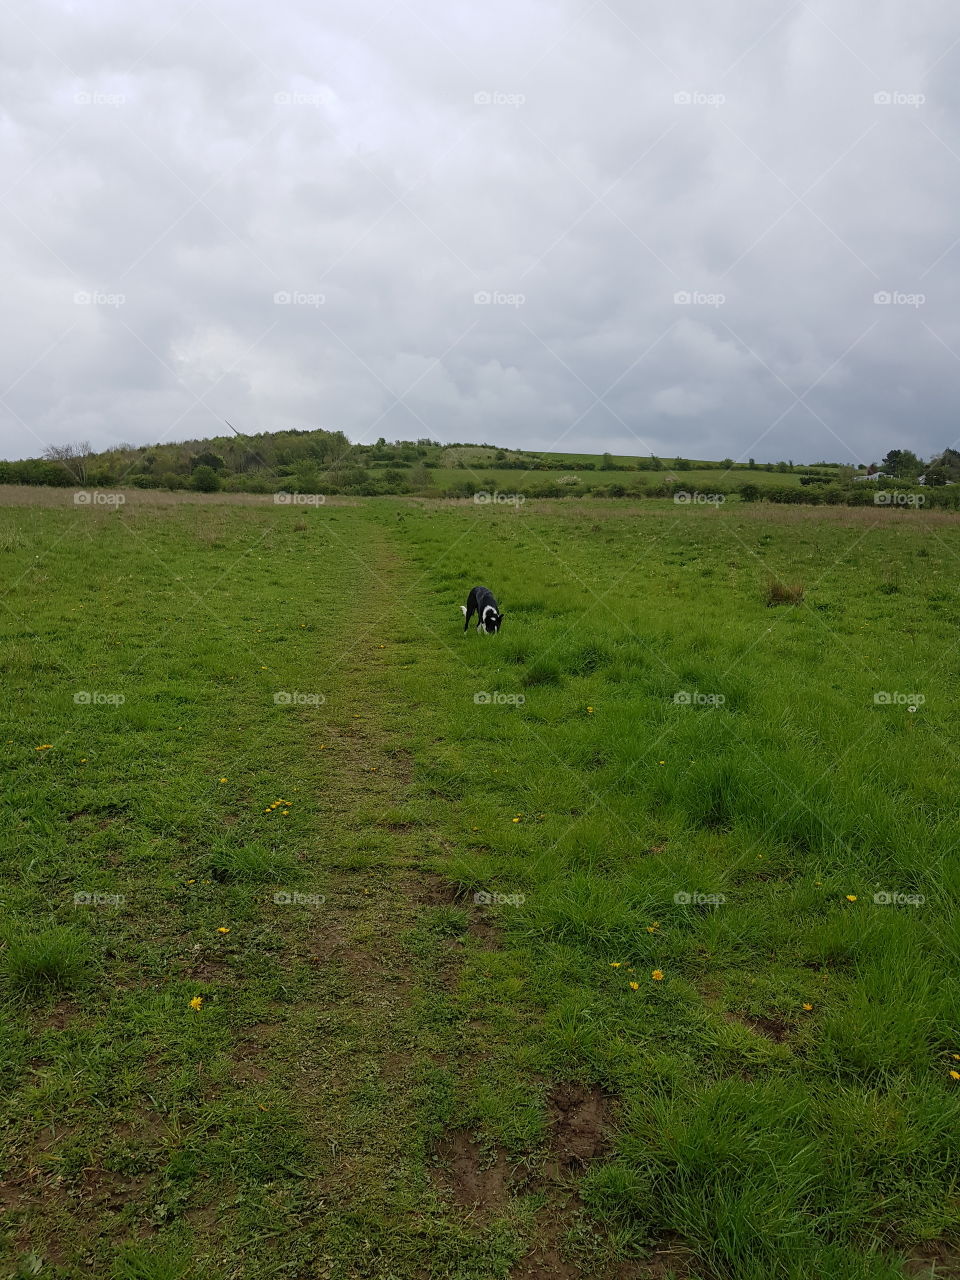 max loving life on his daily walks in the countryside. just need the sun to come out. Scotland is always beautiful